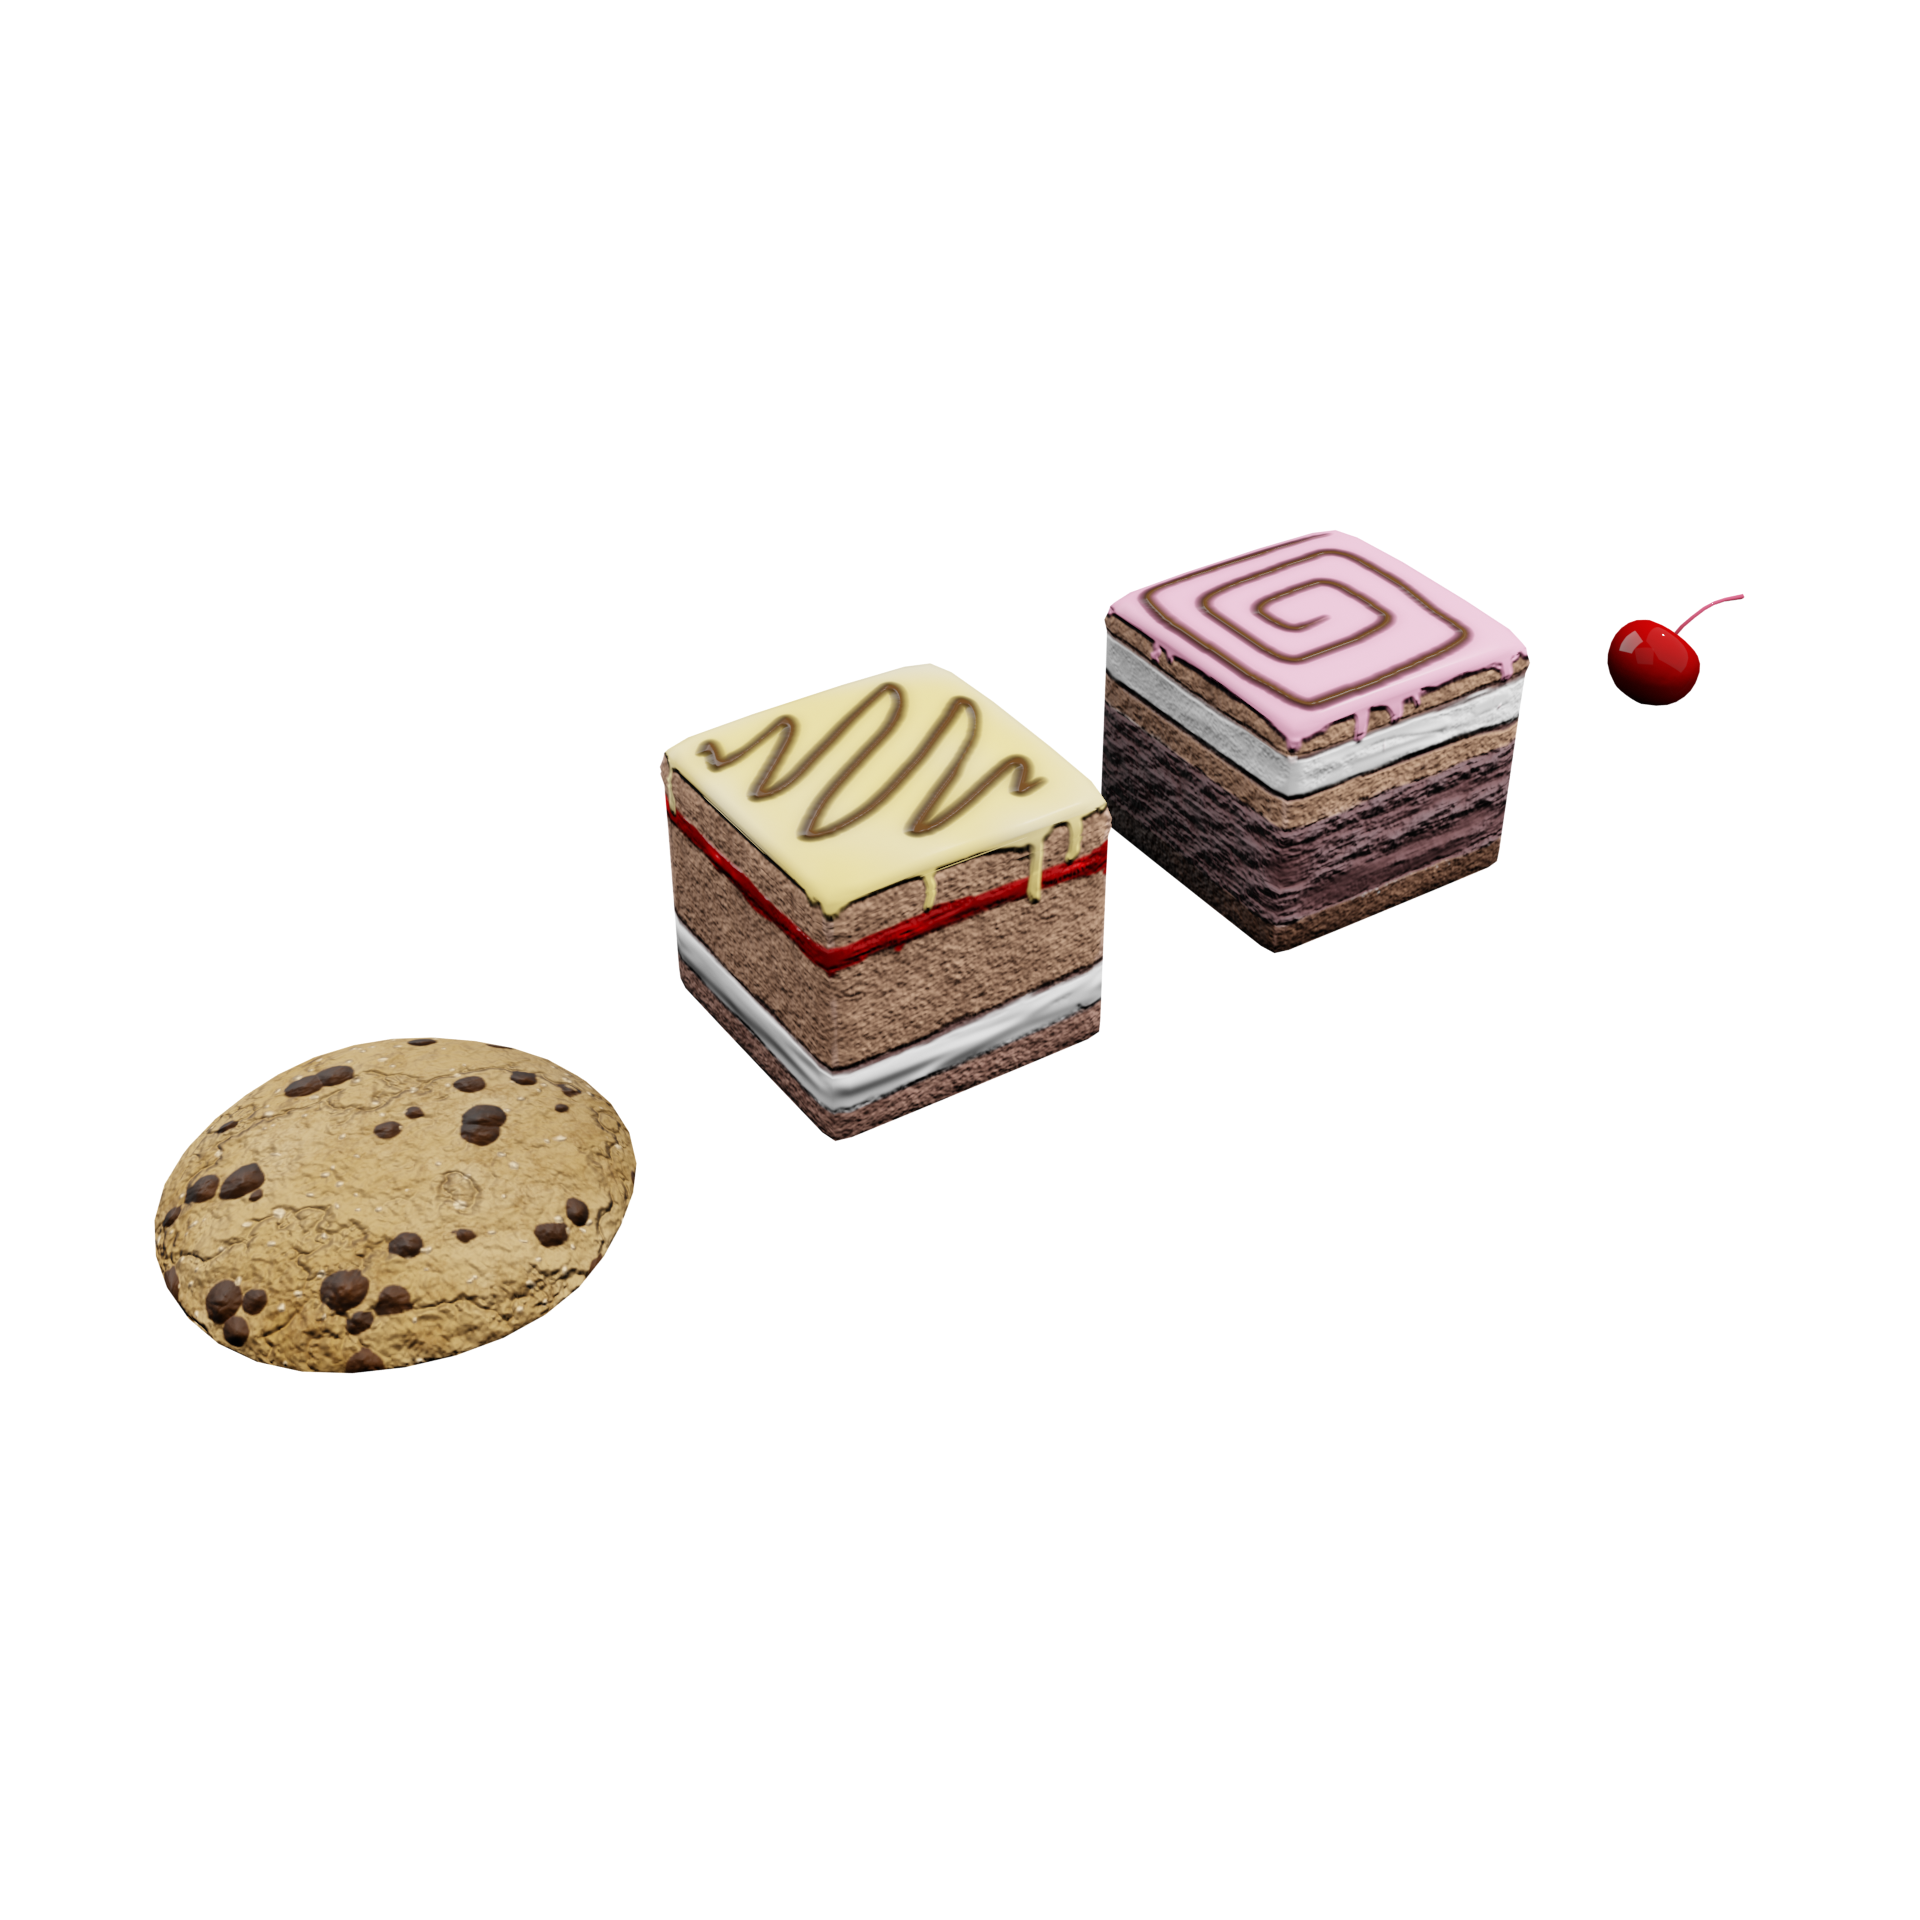 Free 3d models download collection - cake freezer